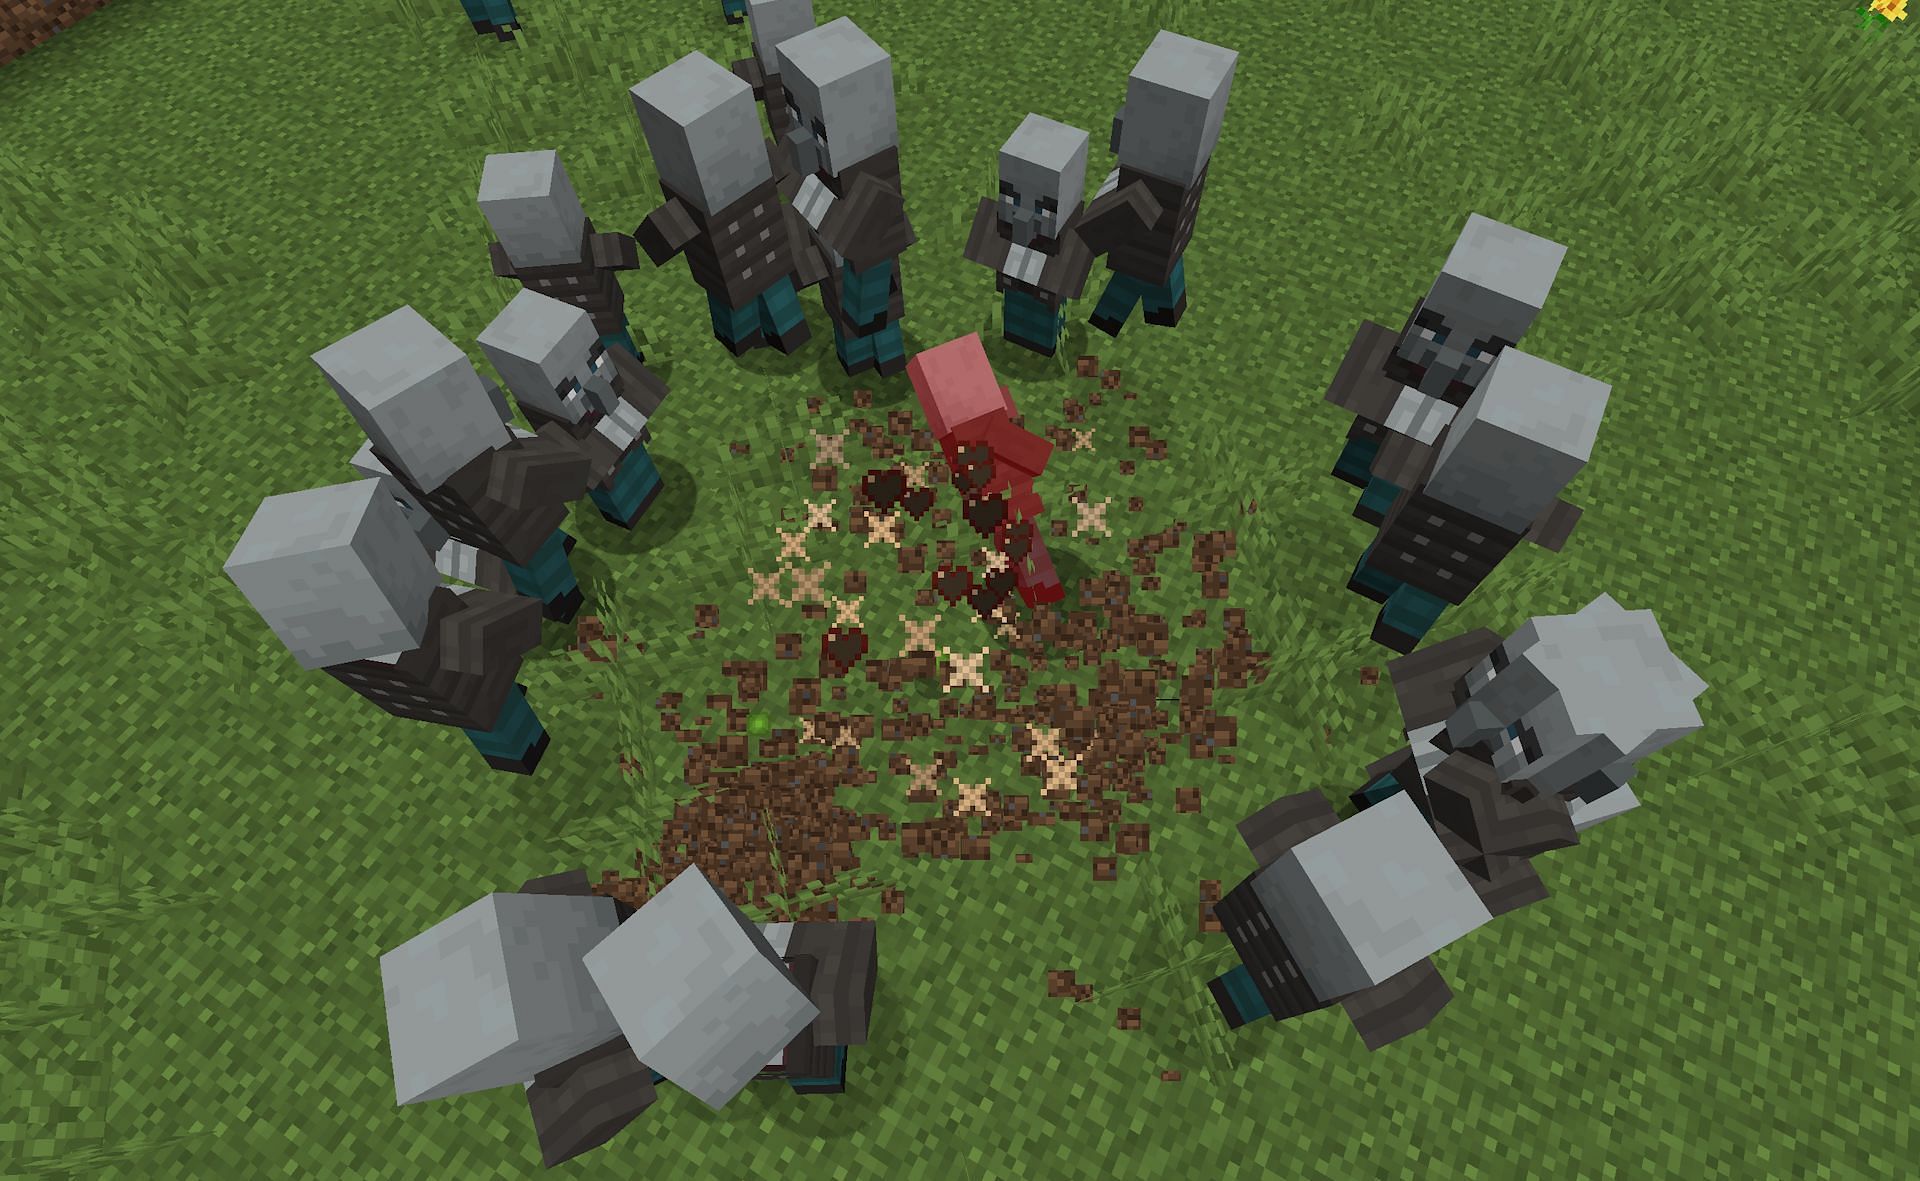 The unique AOE effect is locked behind breeze rods in Minecraft. (Image via Mojang)